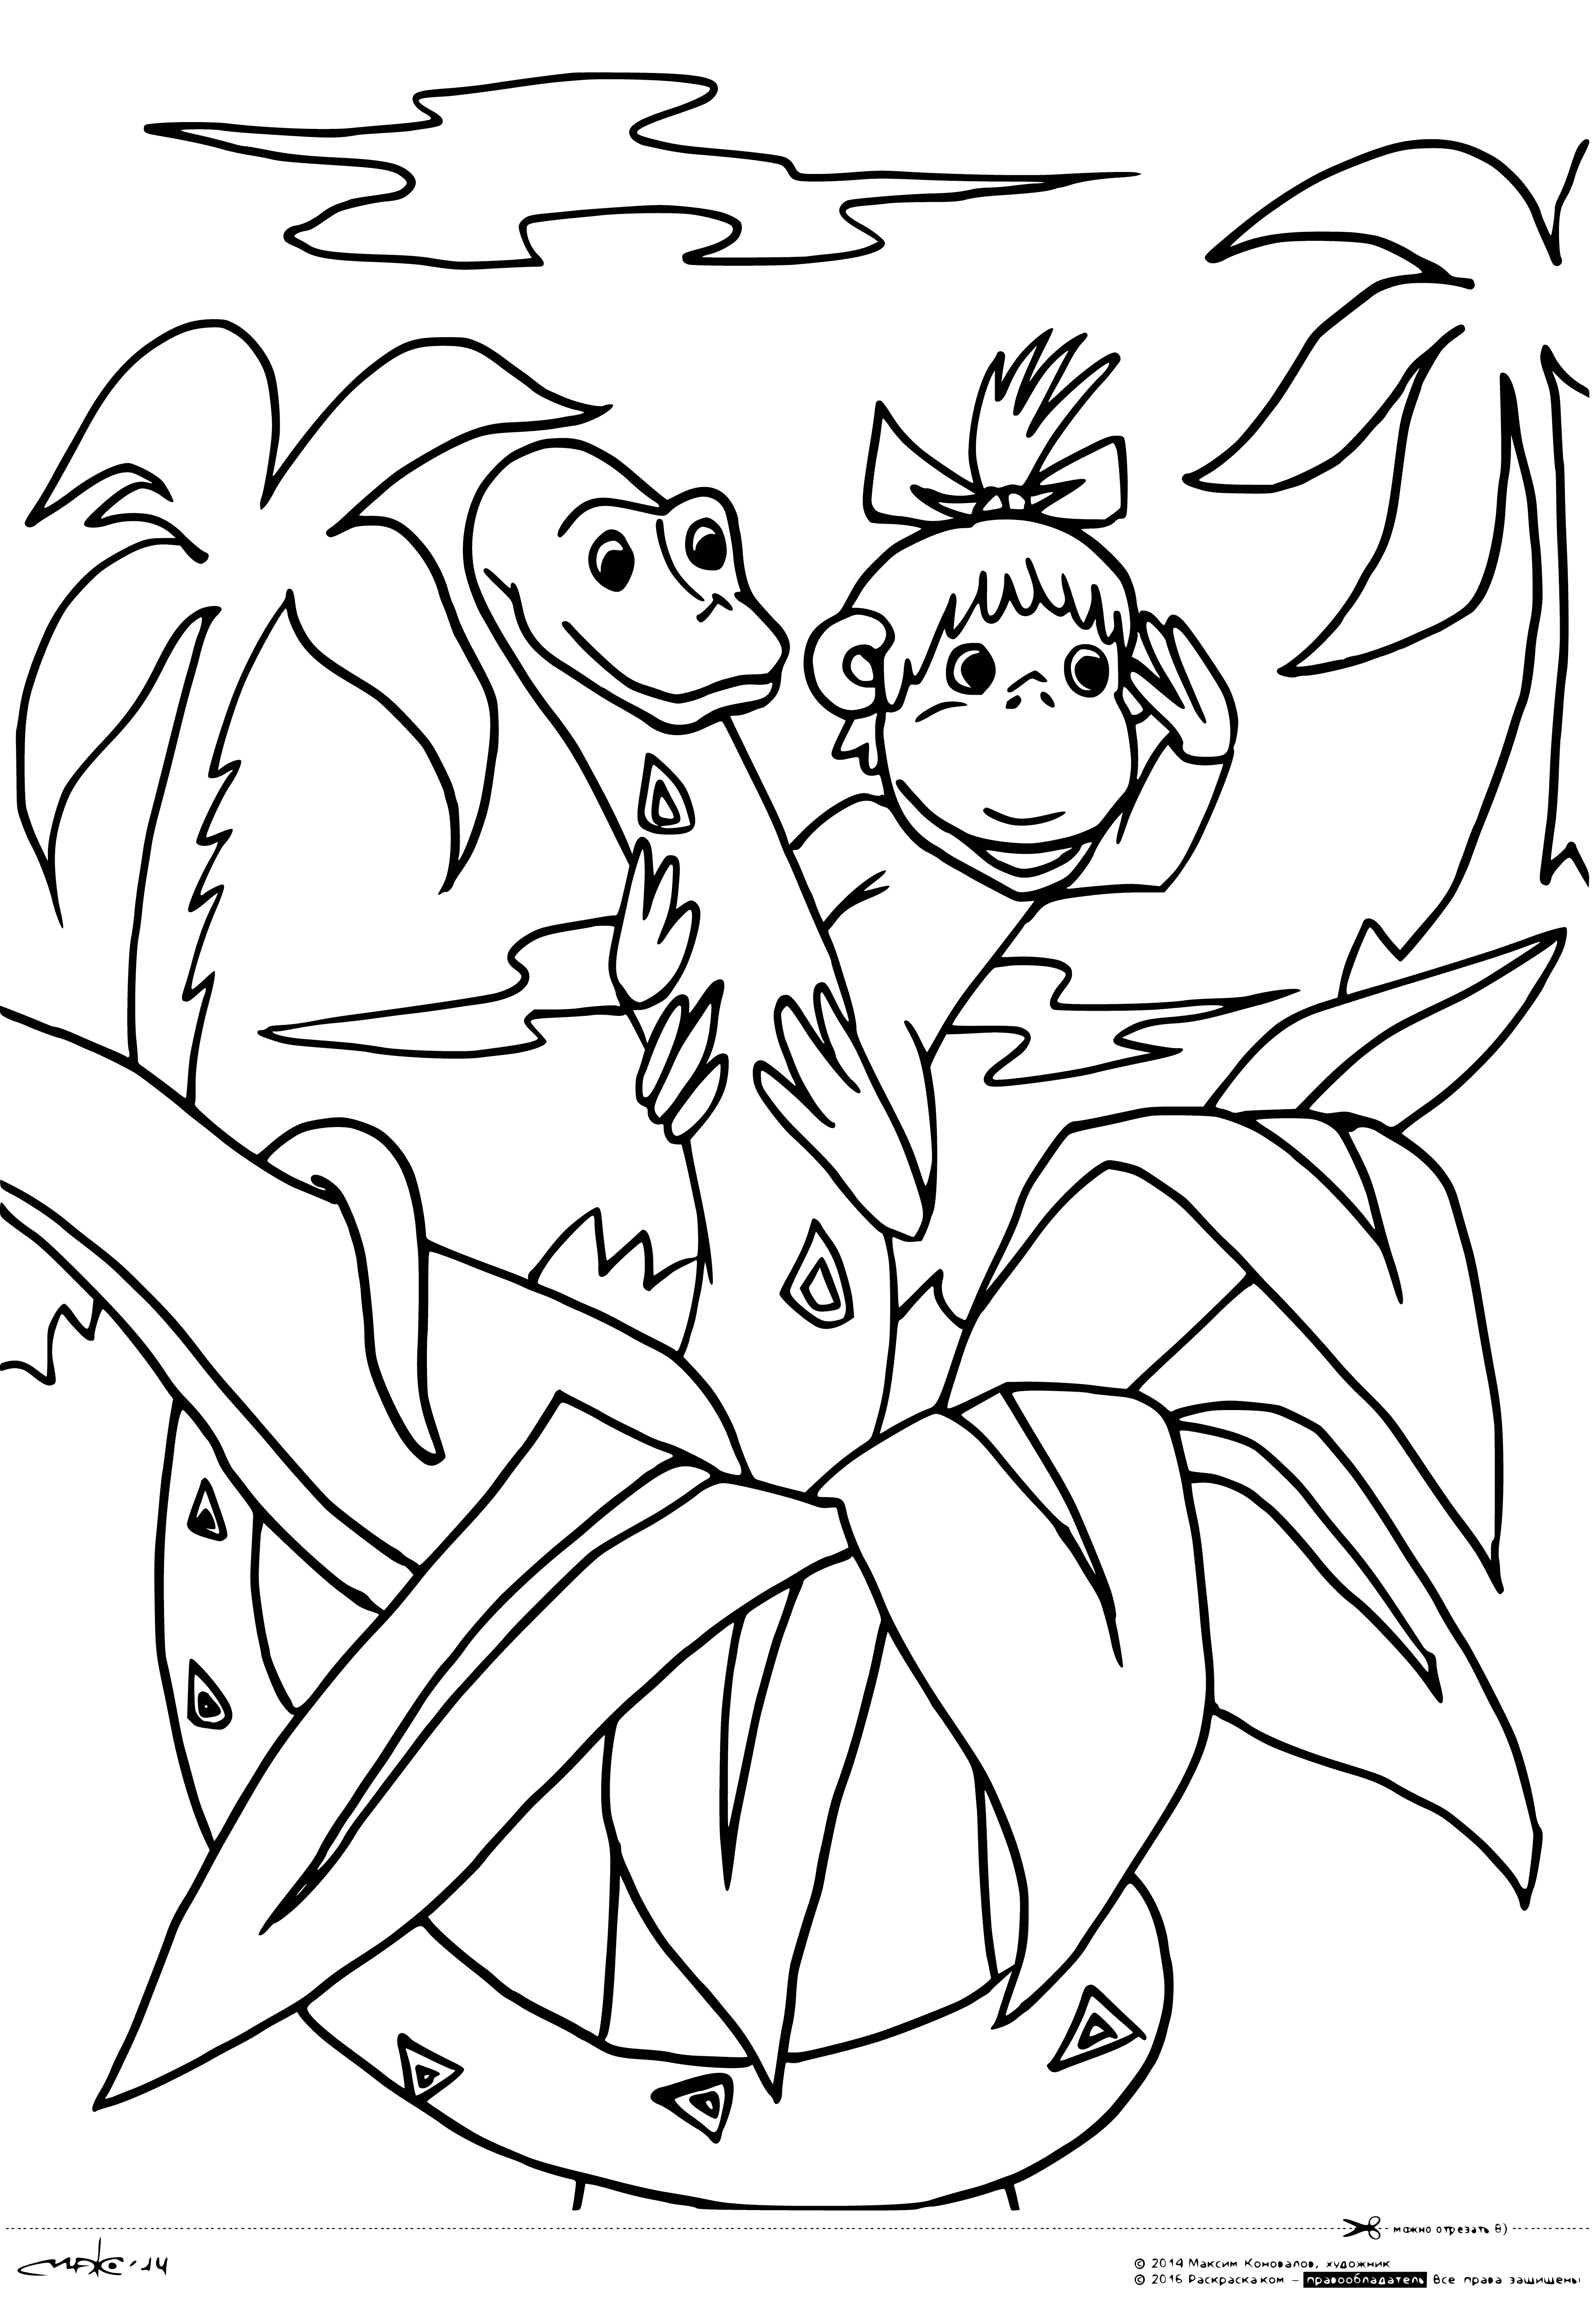 coloring page: 38 parrots of various colors & behaviors on a jungle background in this coloring page, with a bright one in the center.